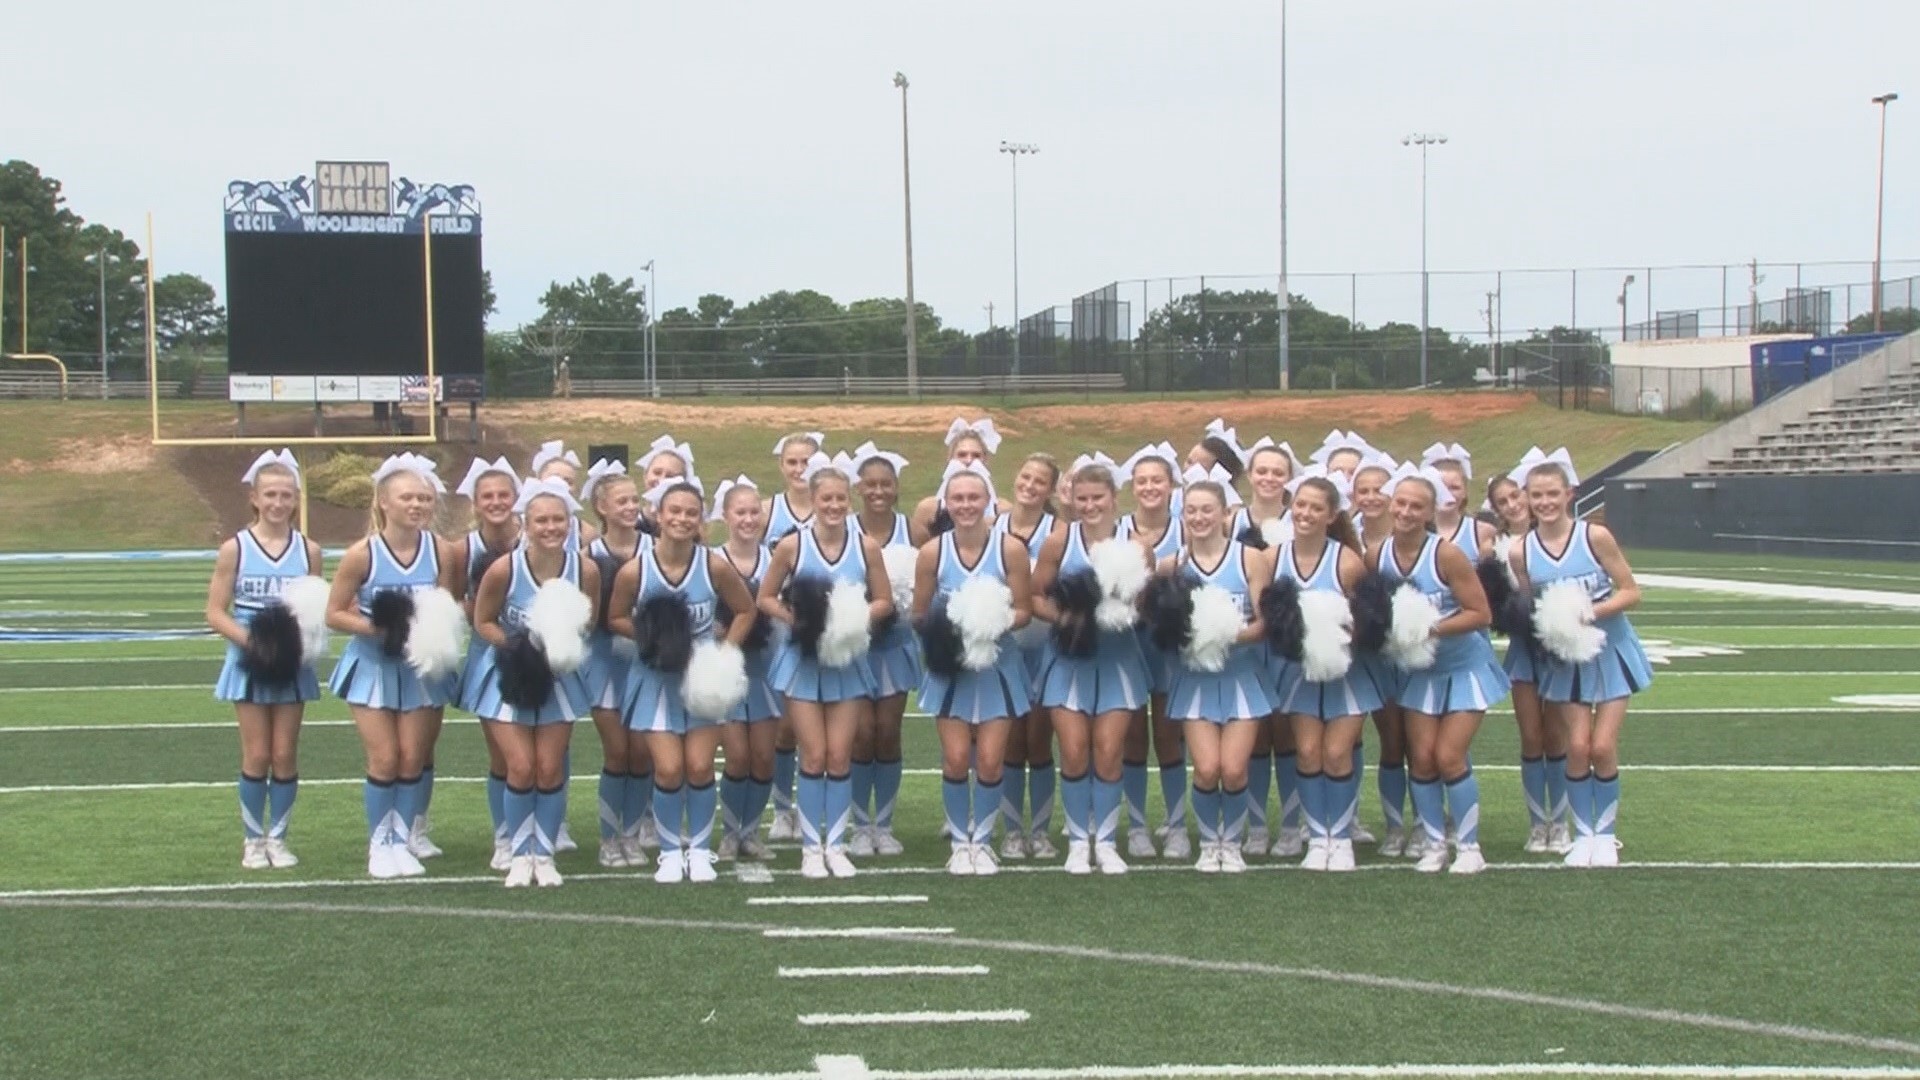 The Chapin High School cheerleaders help to welcome back students and teachers in Lexington-Richland 5.